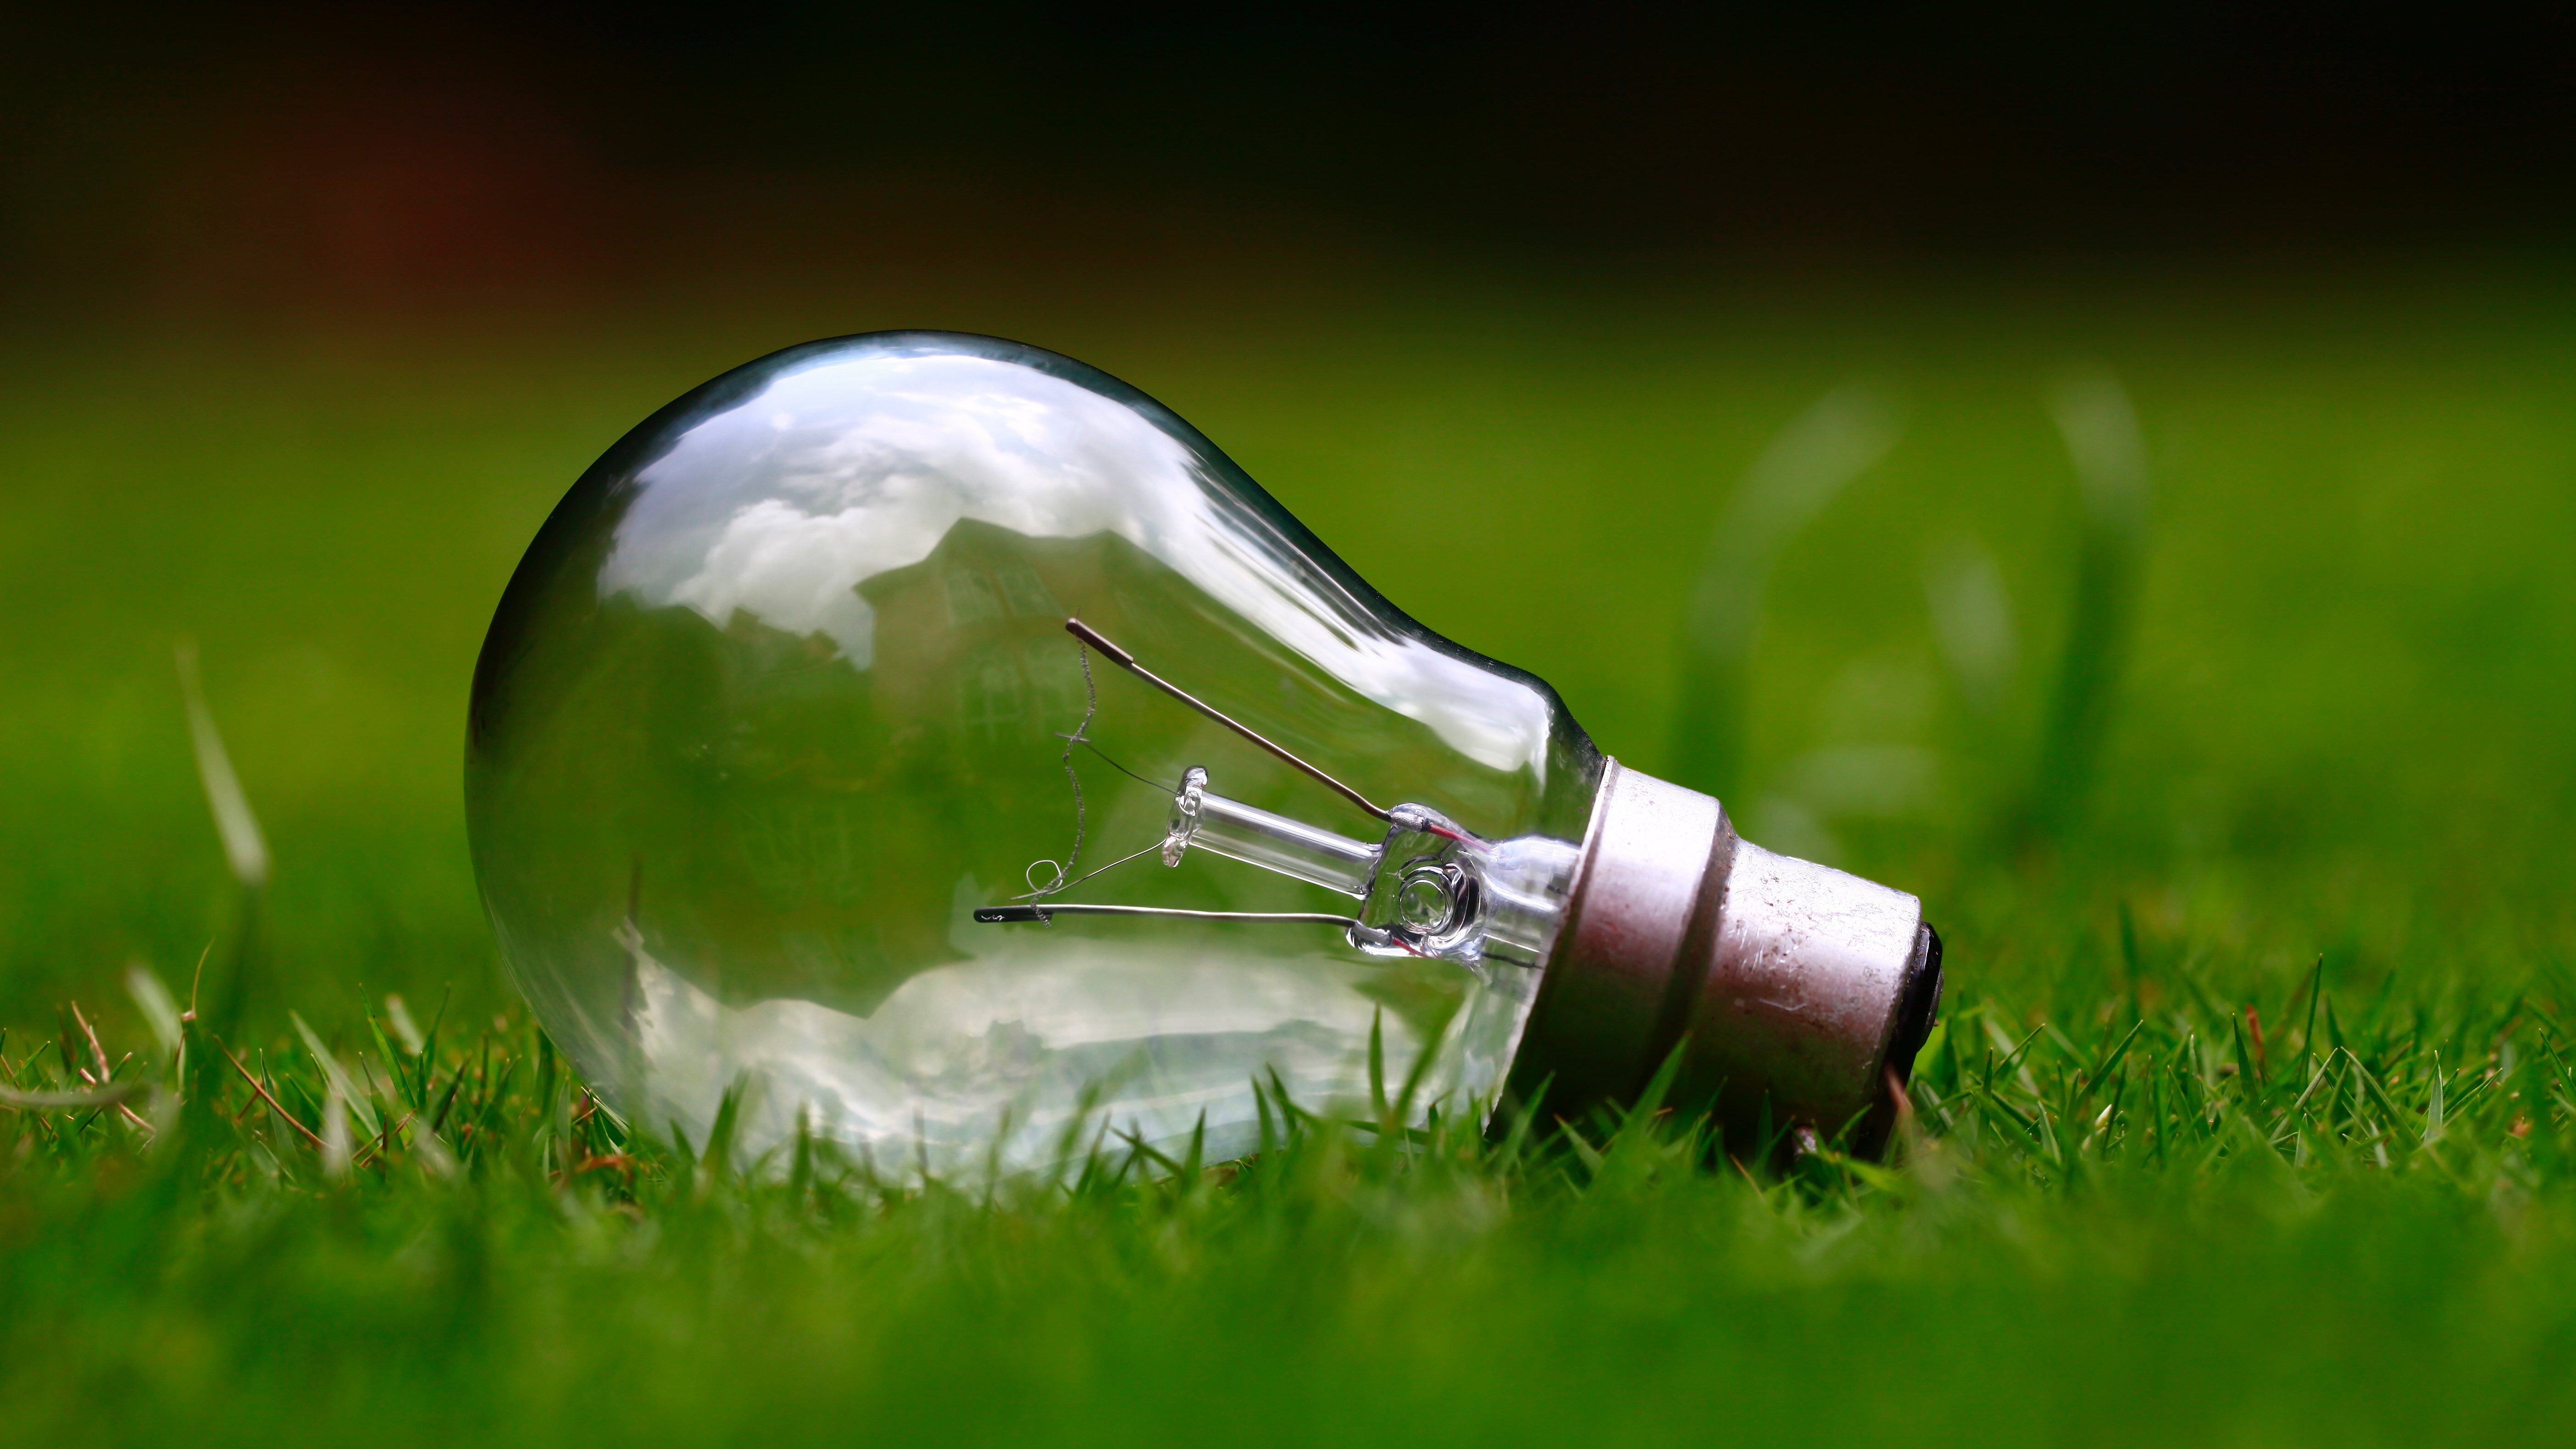 Light bulb laying in grass